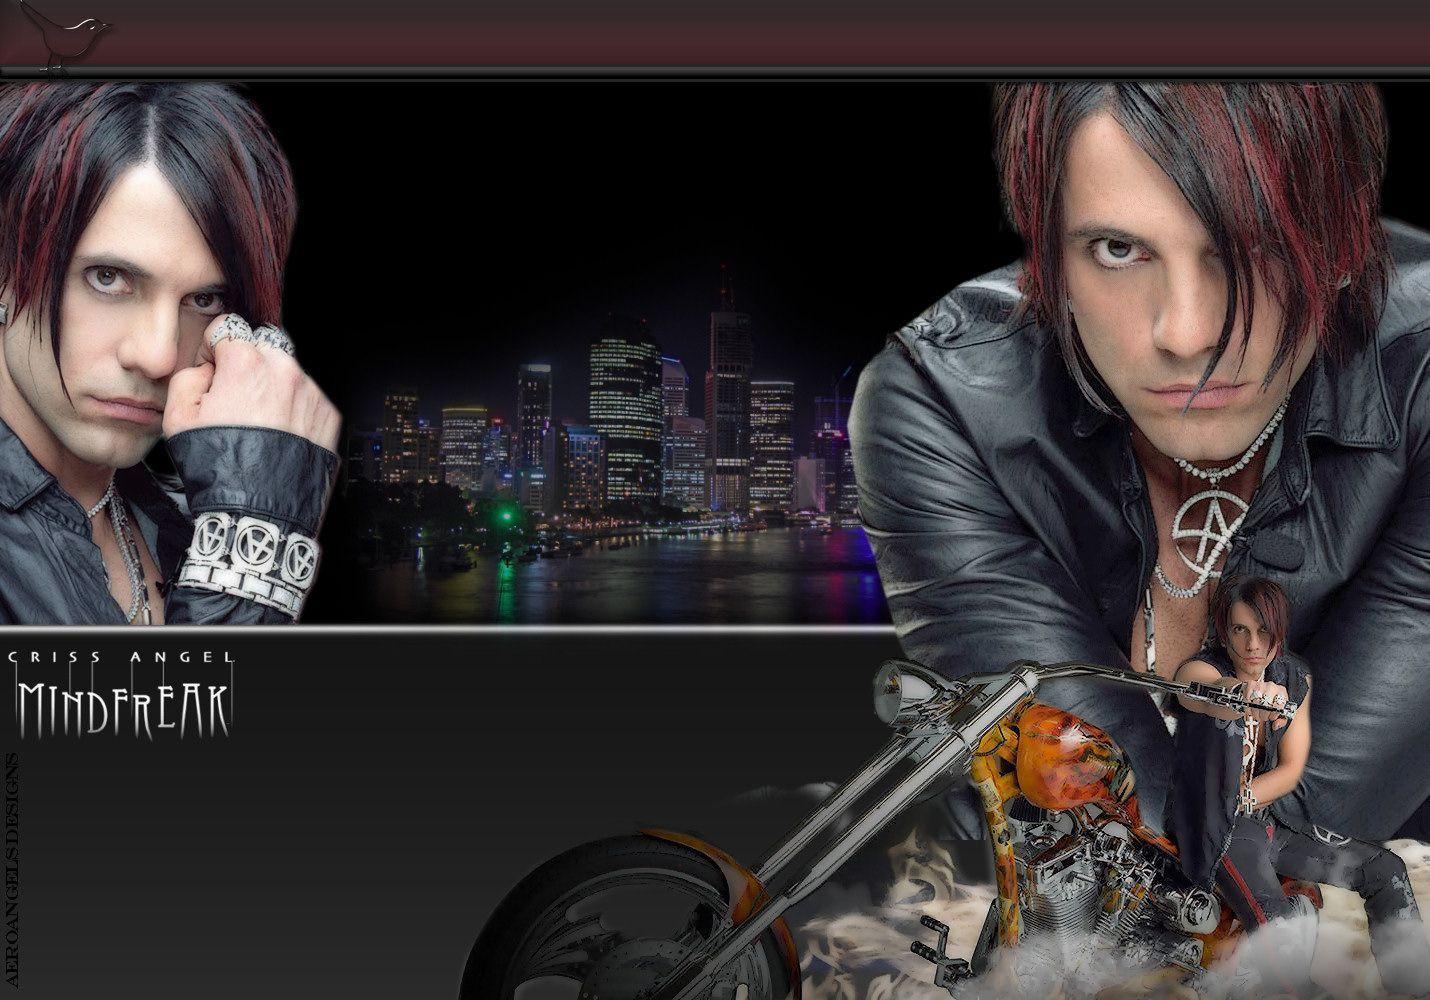 Image For > Criss Angel Mindfreak Wallpapers